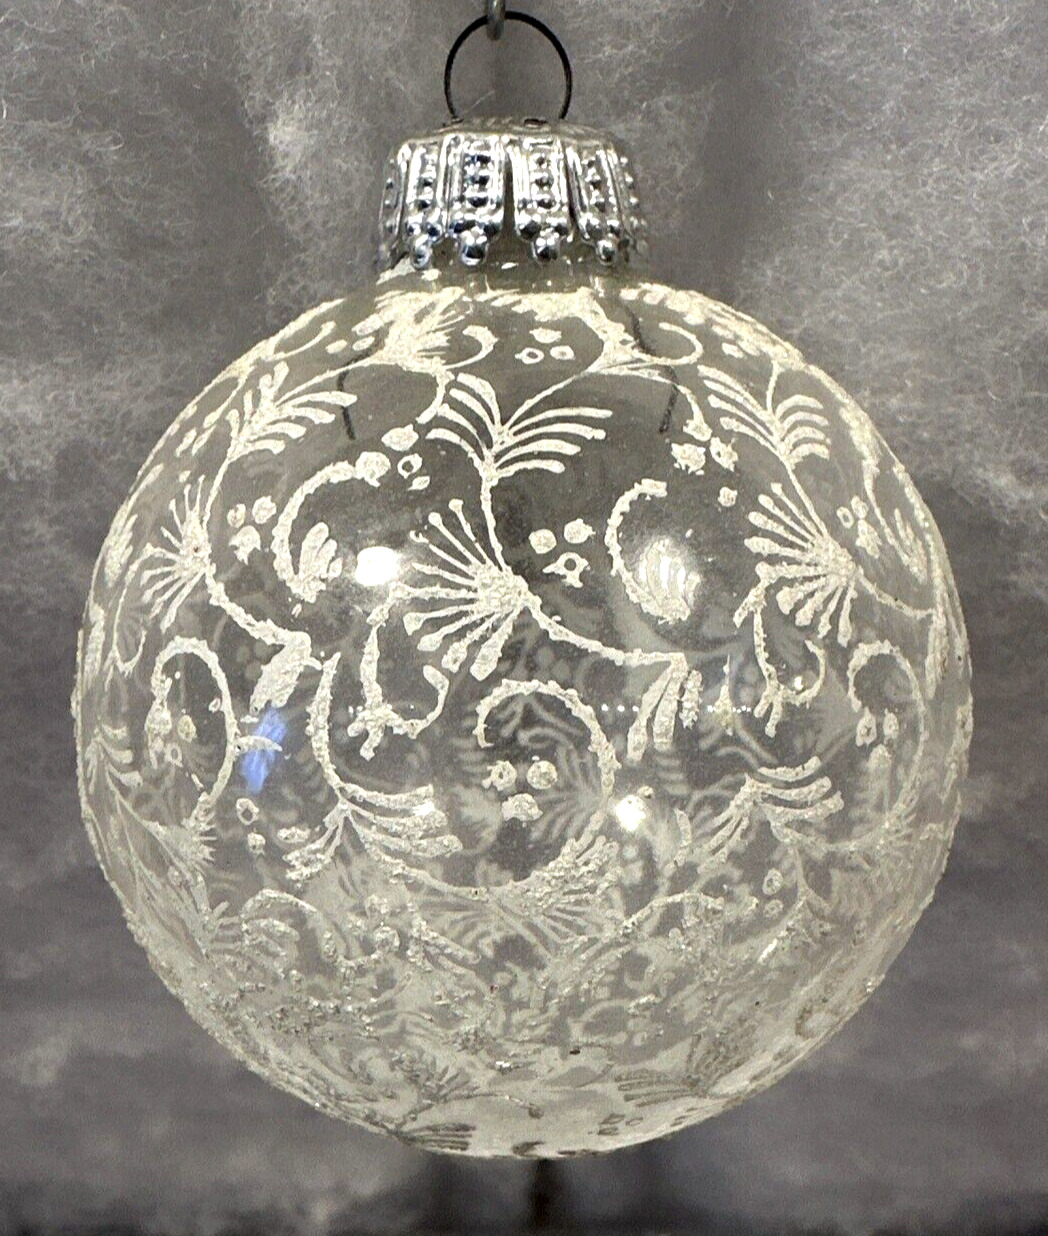 Vintage 1950s Clear Glass Christmas Ornament Floral Mica Glitter - West Germany